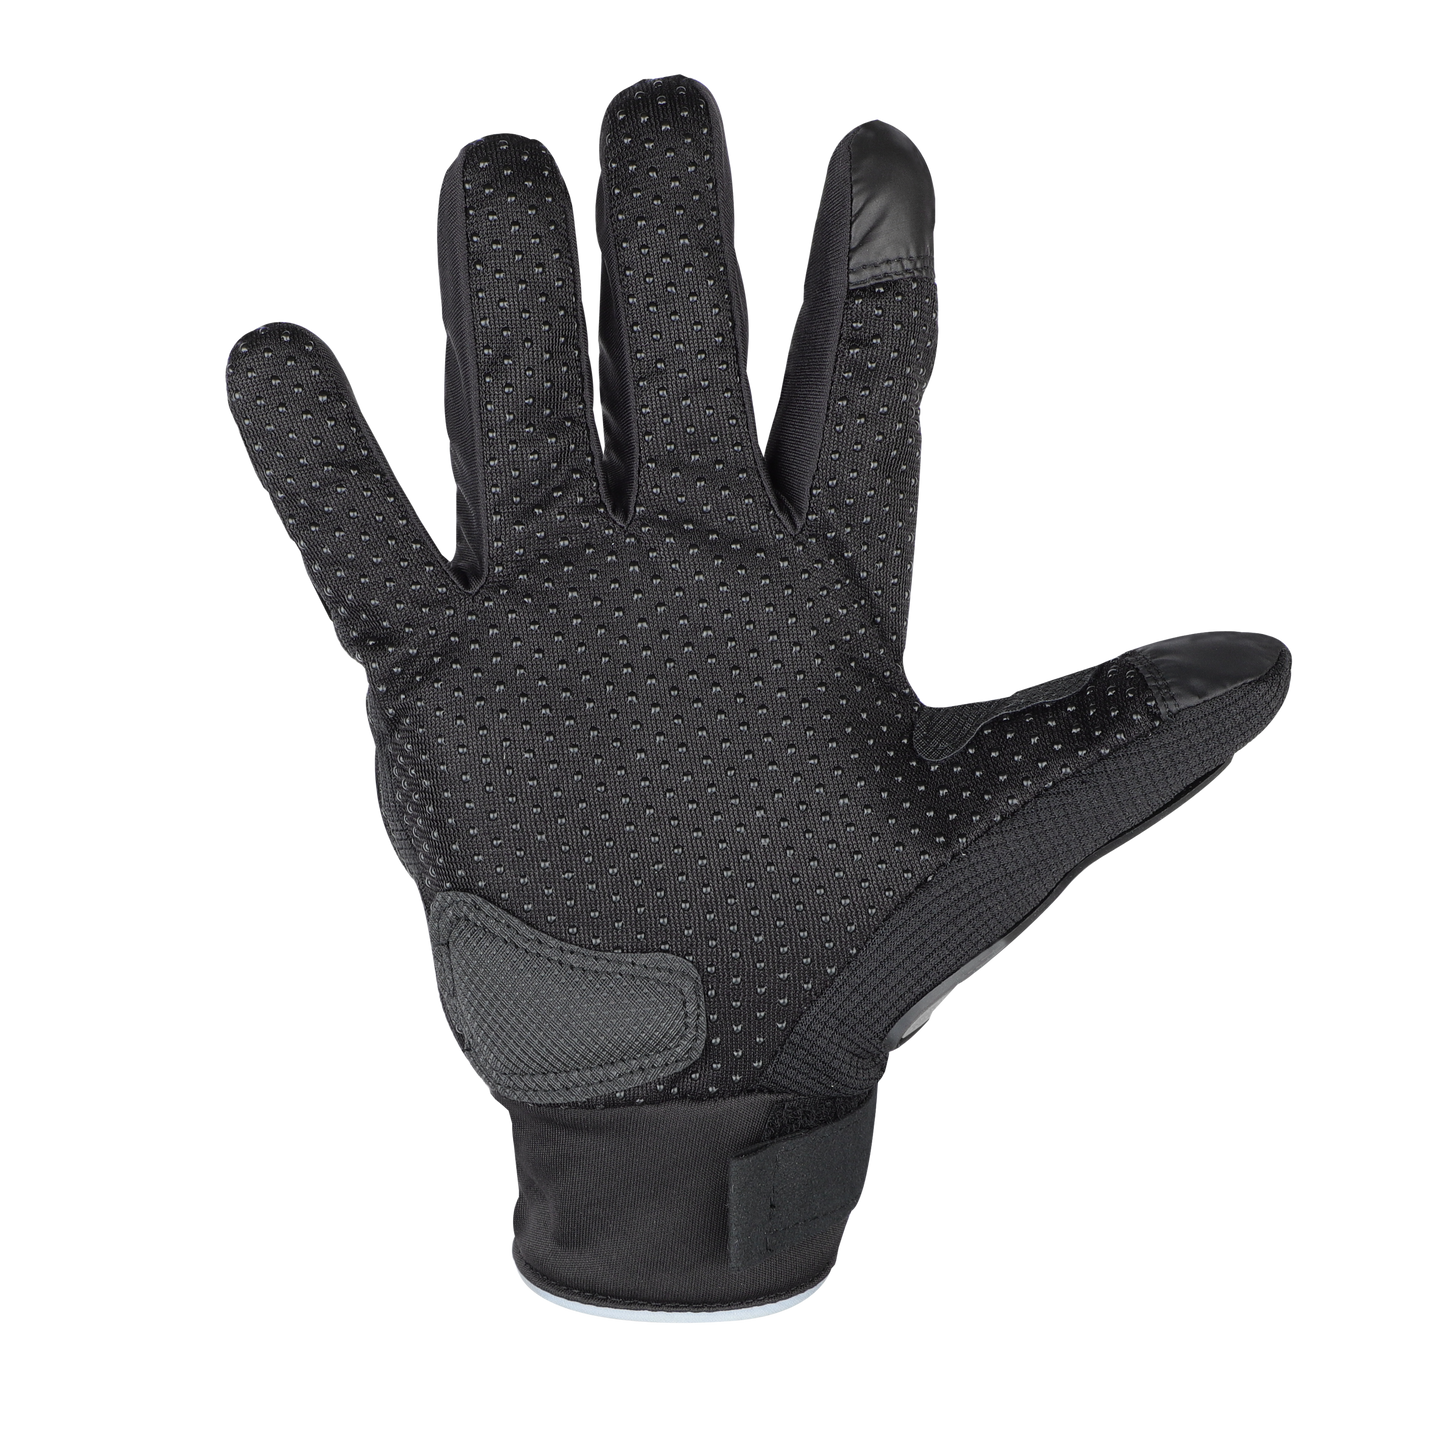 Steelbird Full Finger Bike Riding Gloves with Touch Screen Sensitivity at Thumb and Index Finger, Protective Off-Road Motorbike Racing (Black Grey)